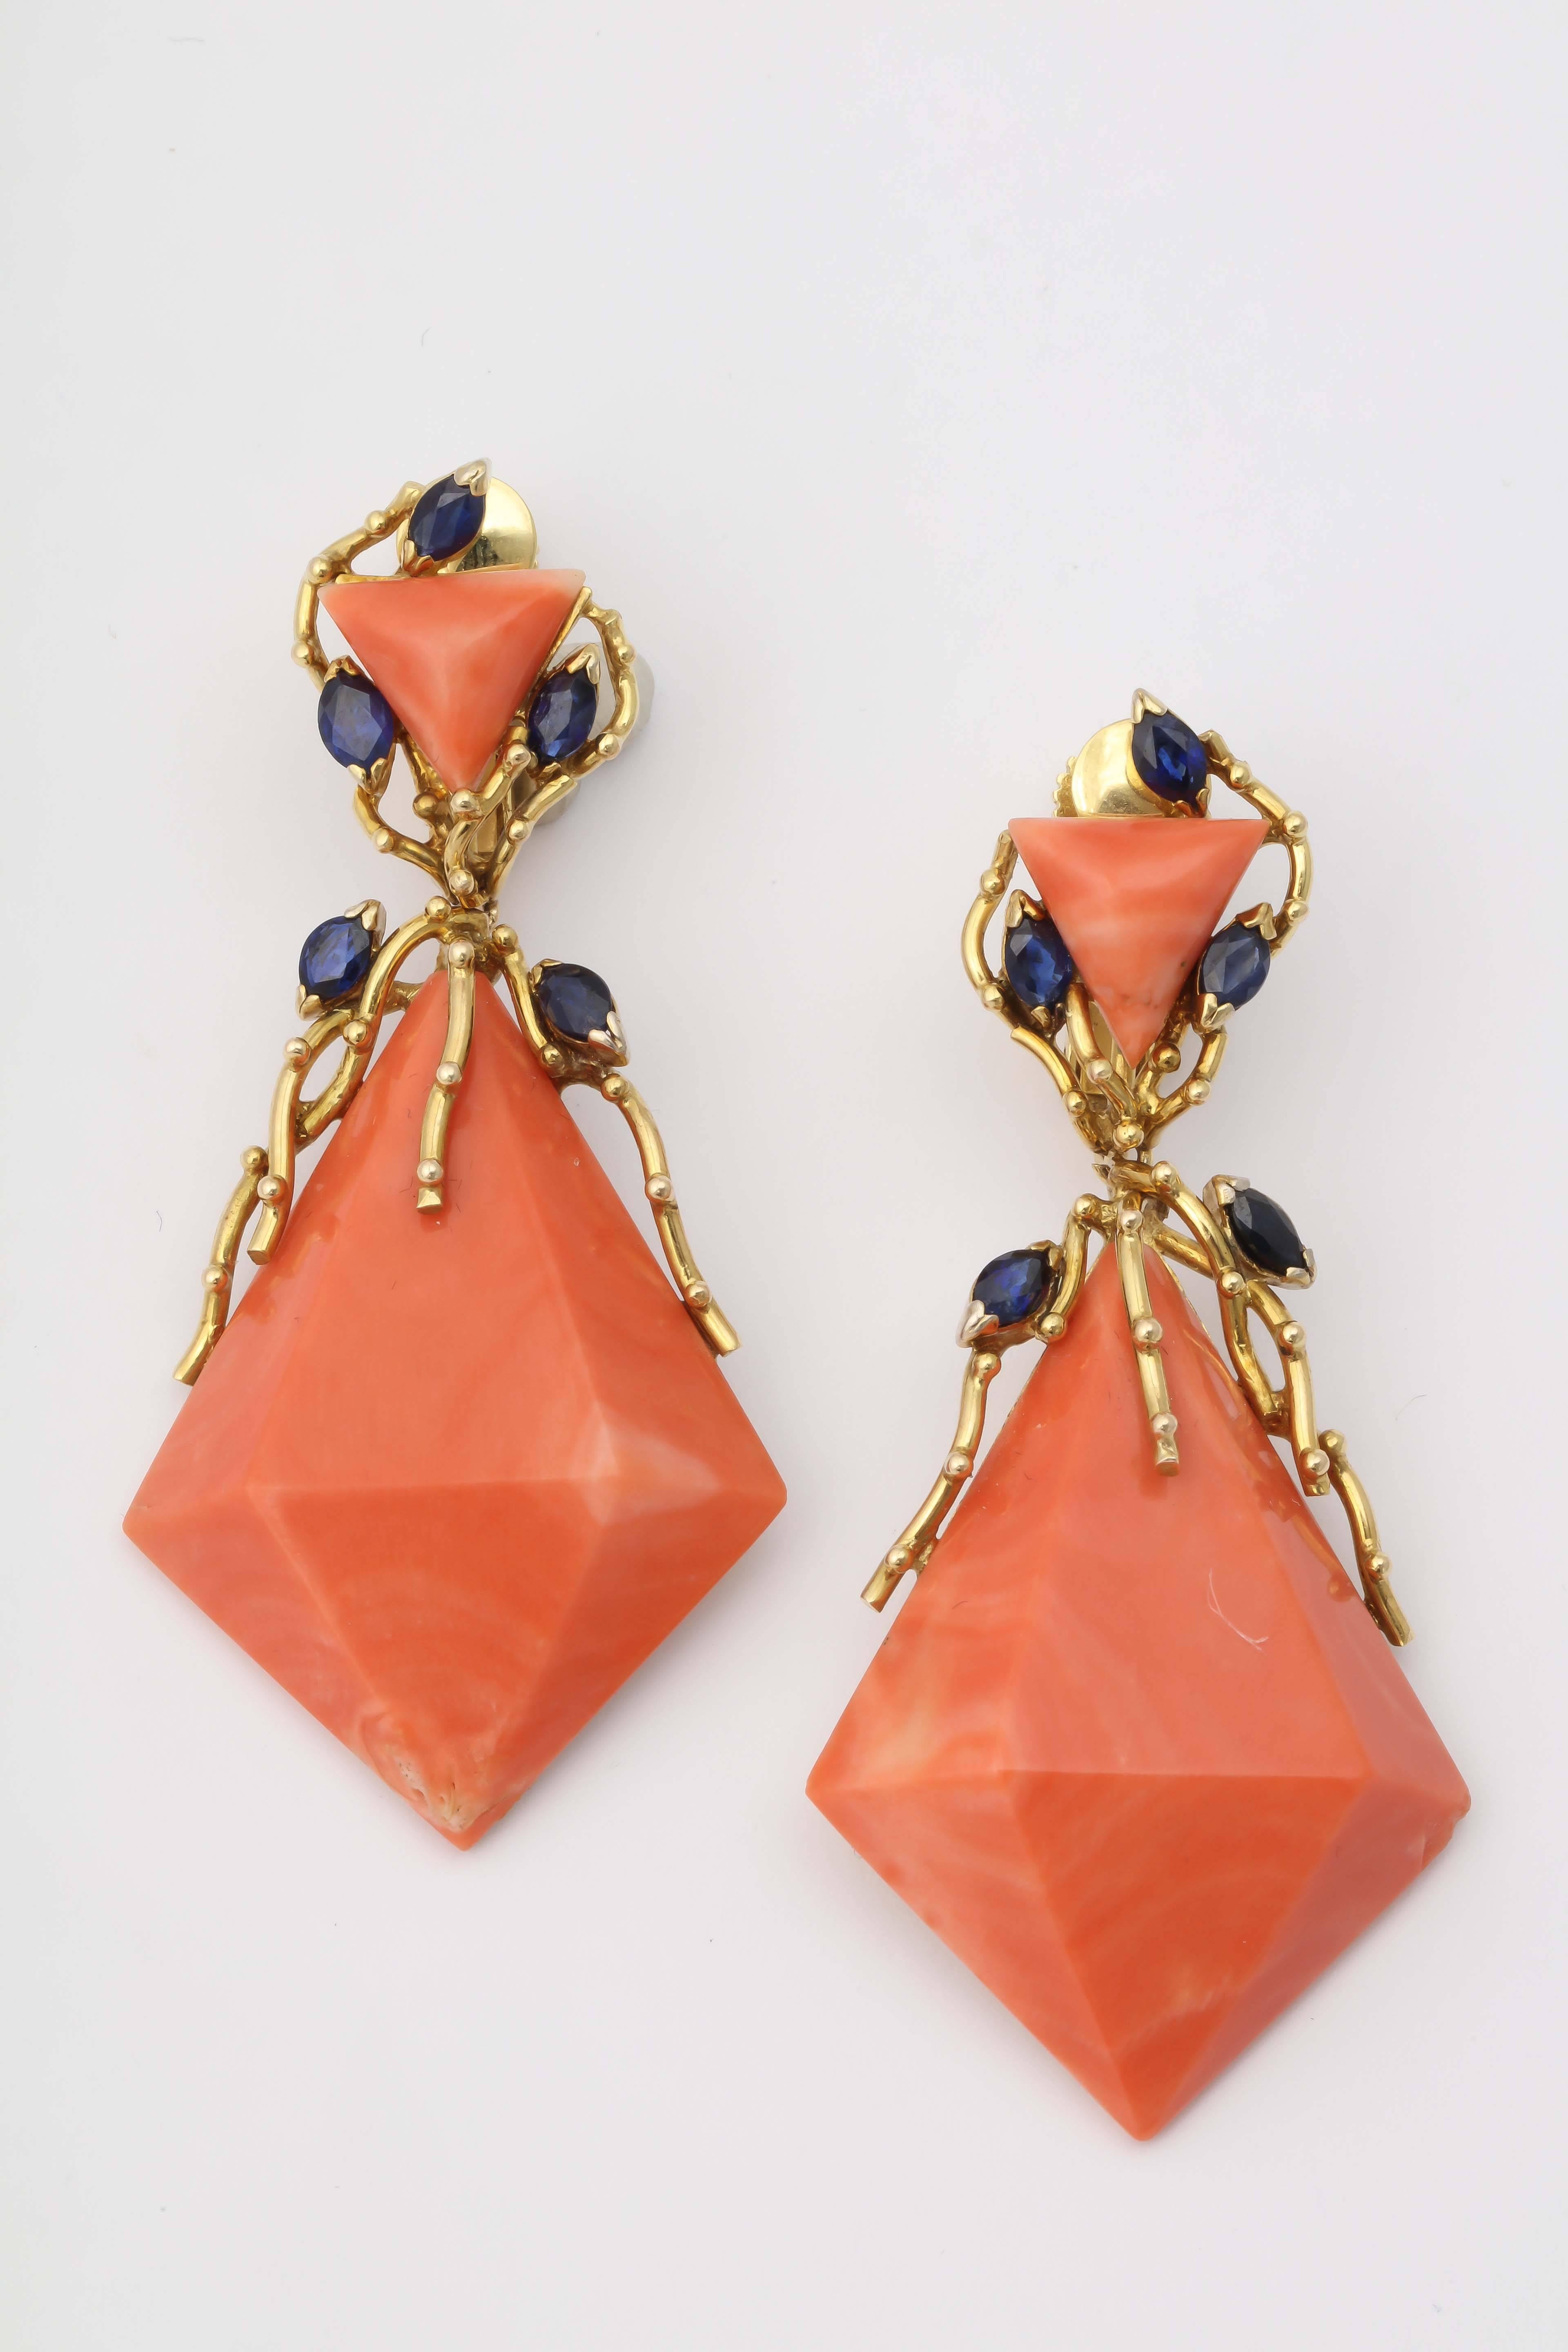 14kt Yellow Gold Hanging Drop Coral & Sapphire Earclips Designed With [10] Pear Shaped Cut Beautiful Color Sapphires Weighing Approximately 1 Carat Total Weight And Further Embellished With [2] Large Triangular Cut Coral Stones Measuring